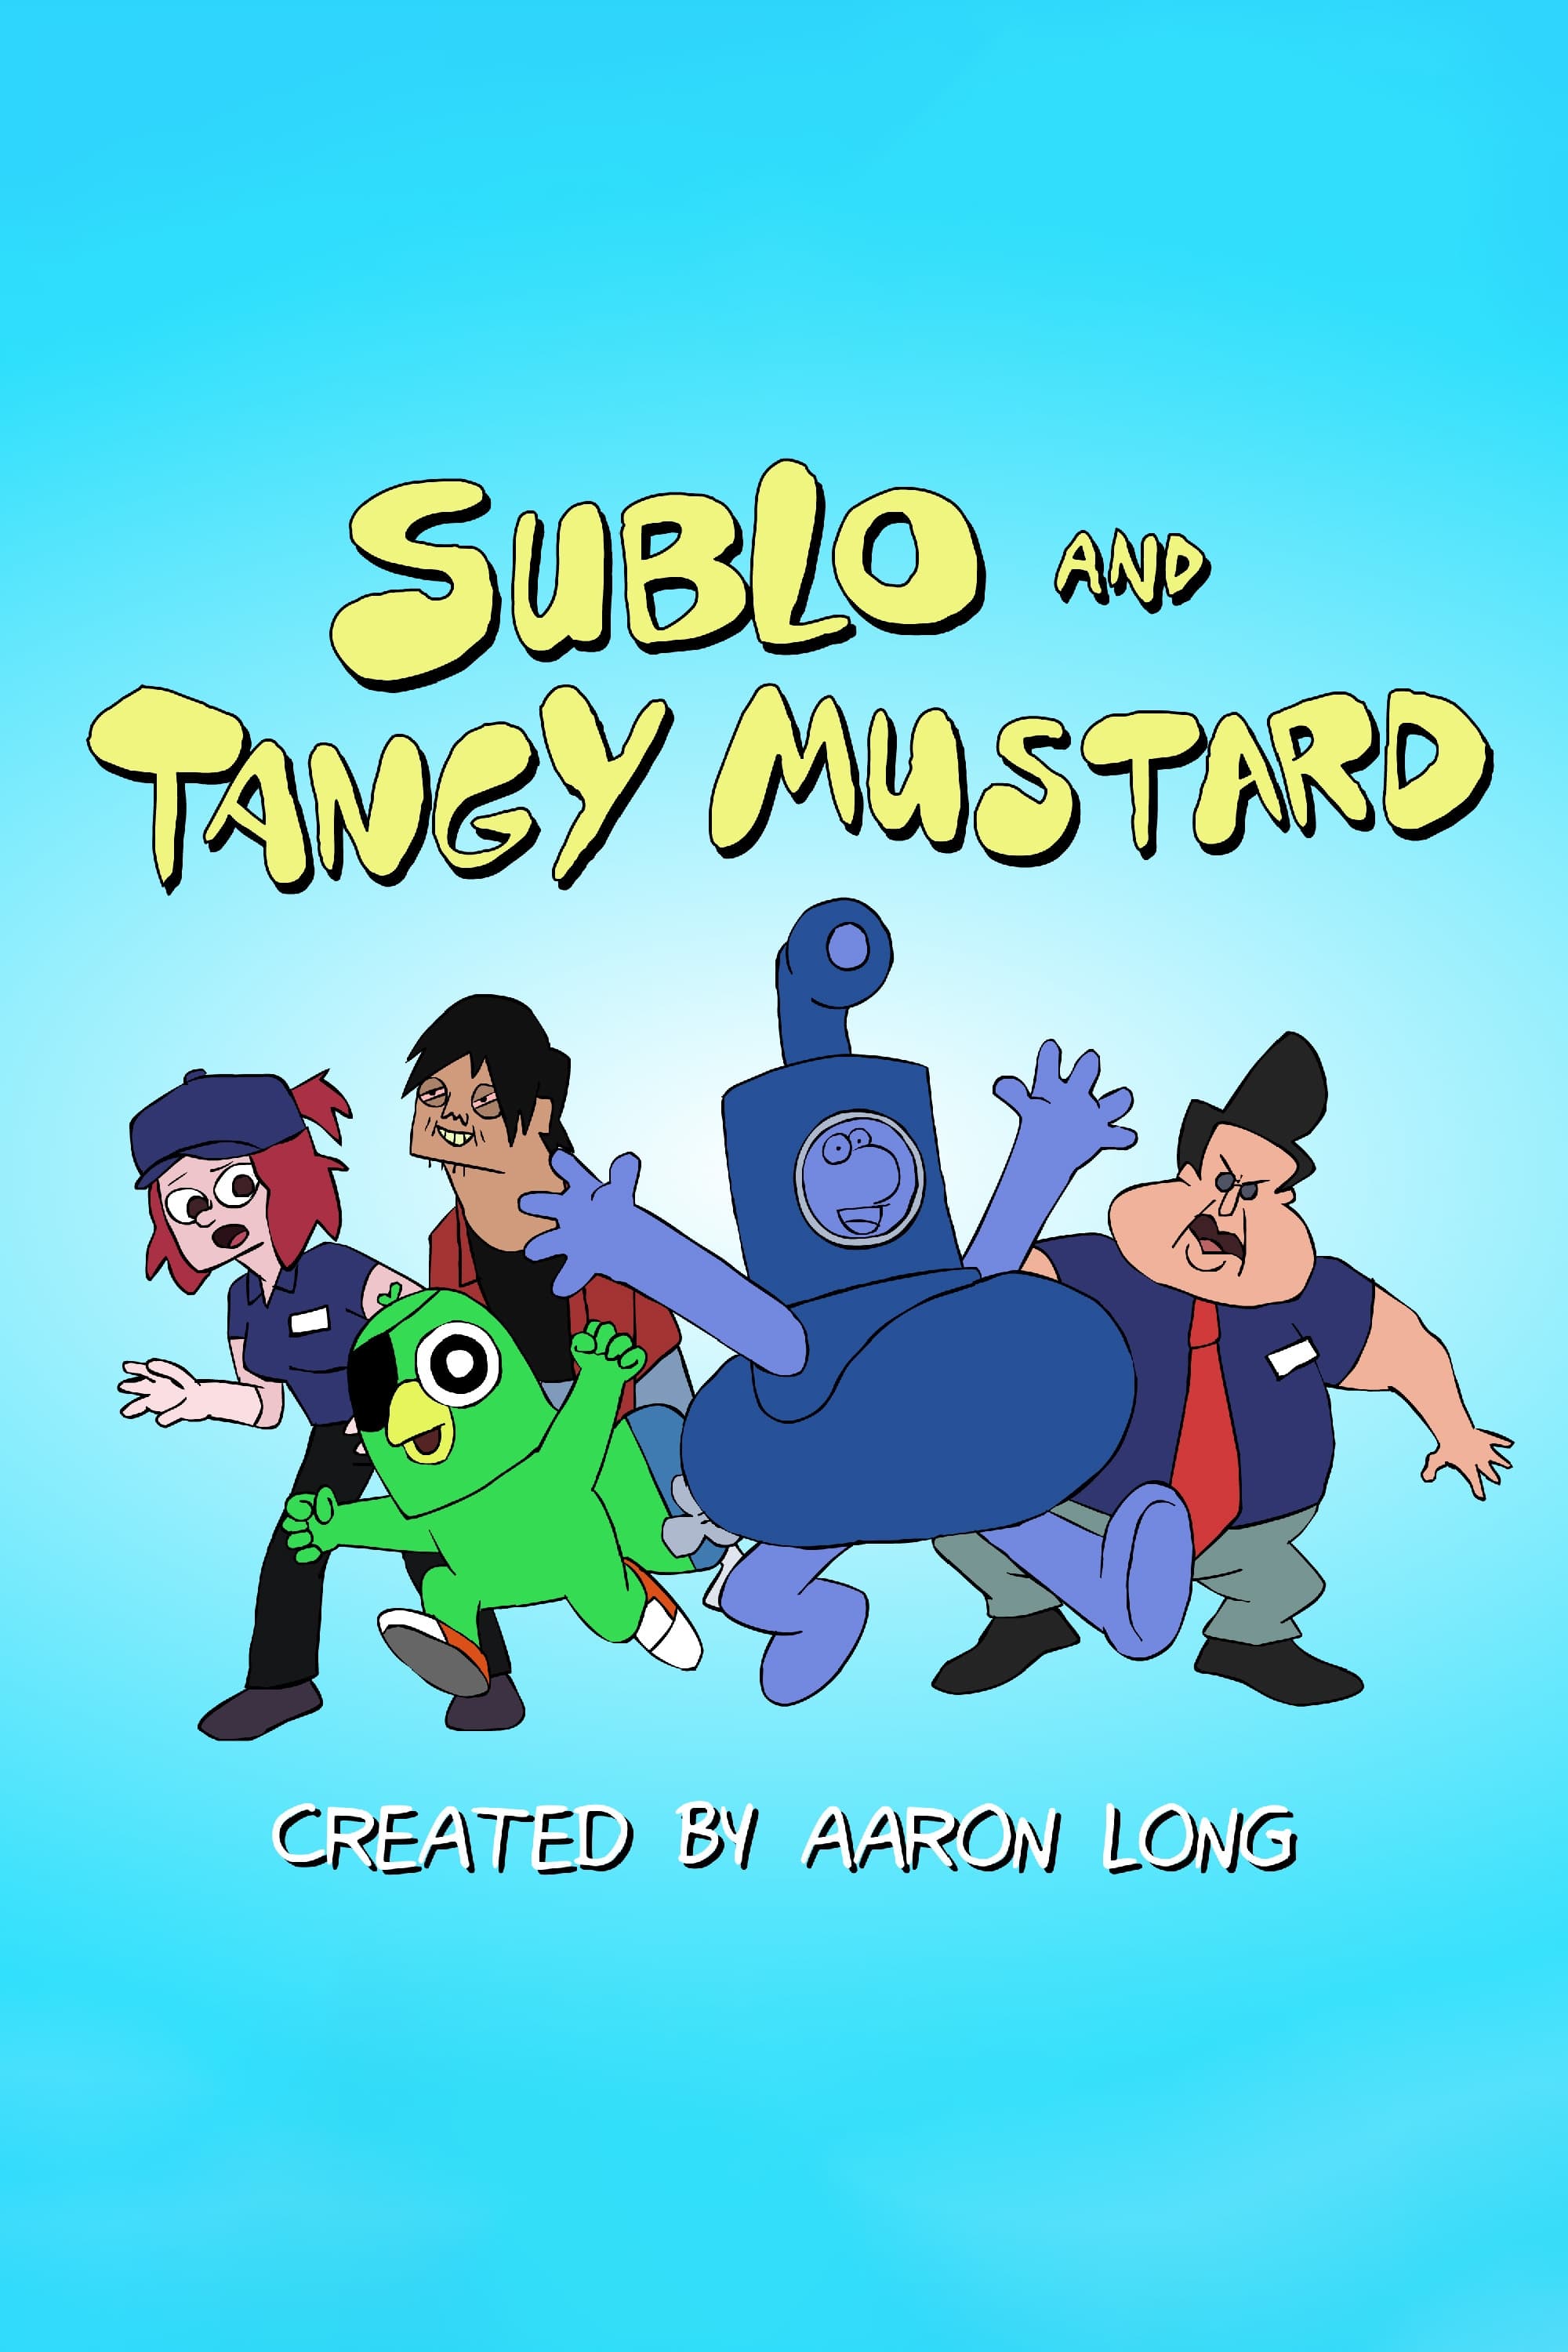 Sublo and Tangy Mustard